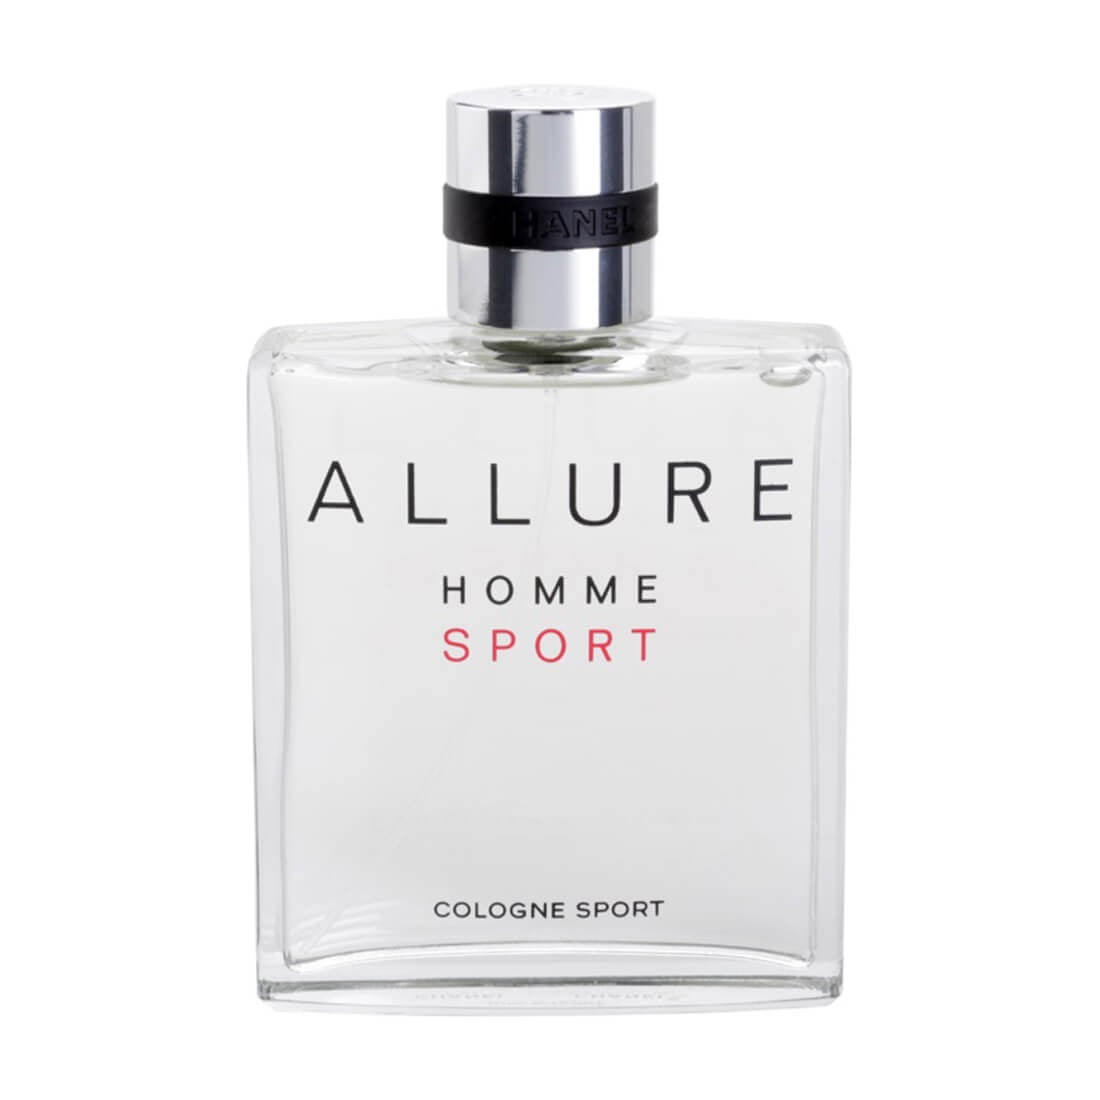 EMPTY Allure Homme Sport Chanel After Shave Bottle & Box 100ml